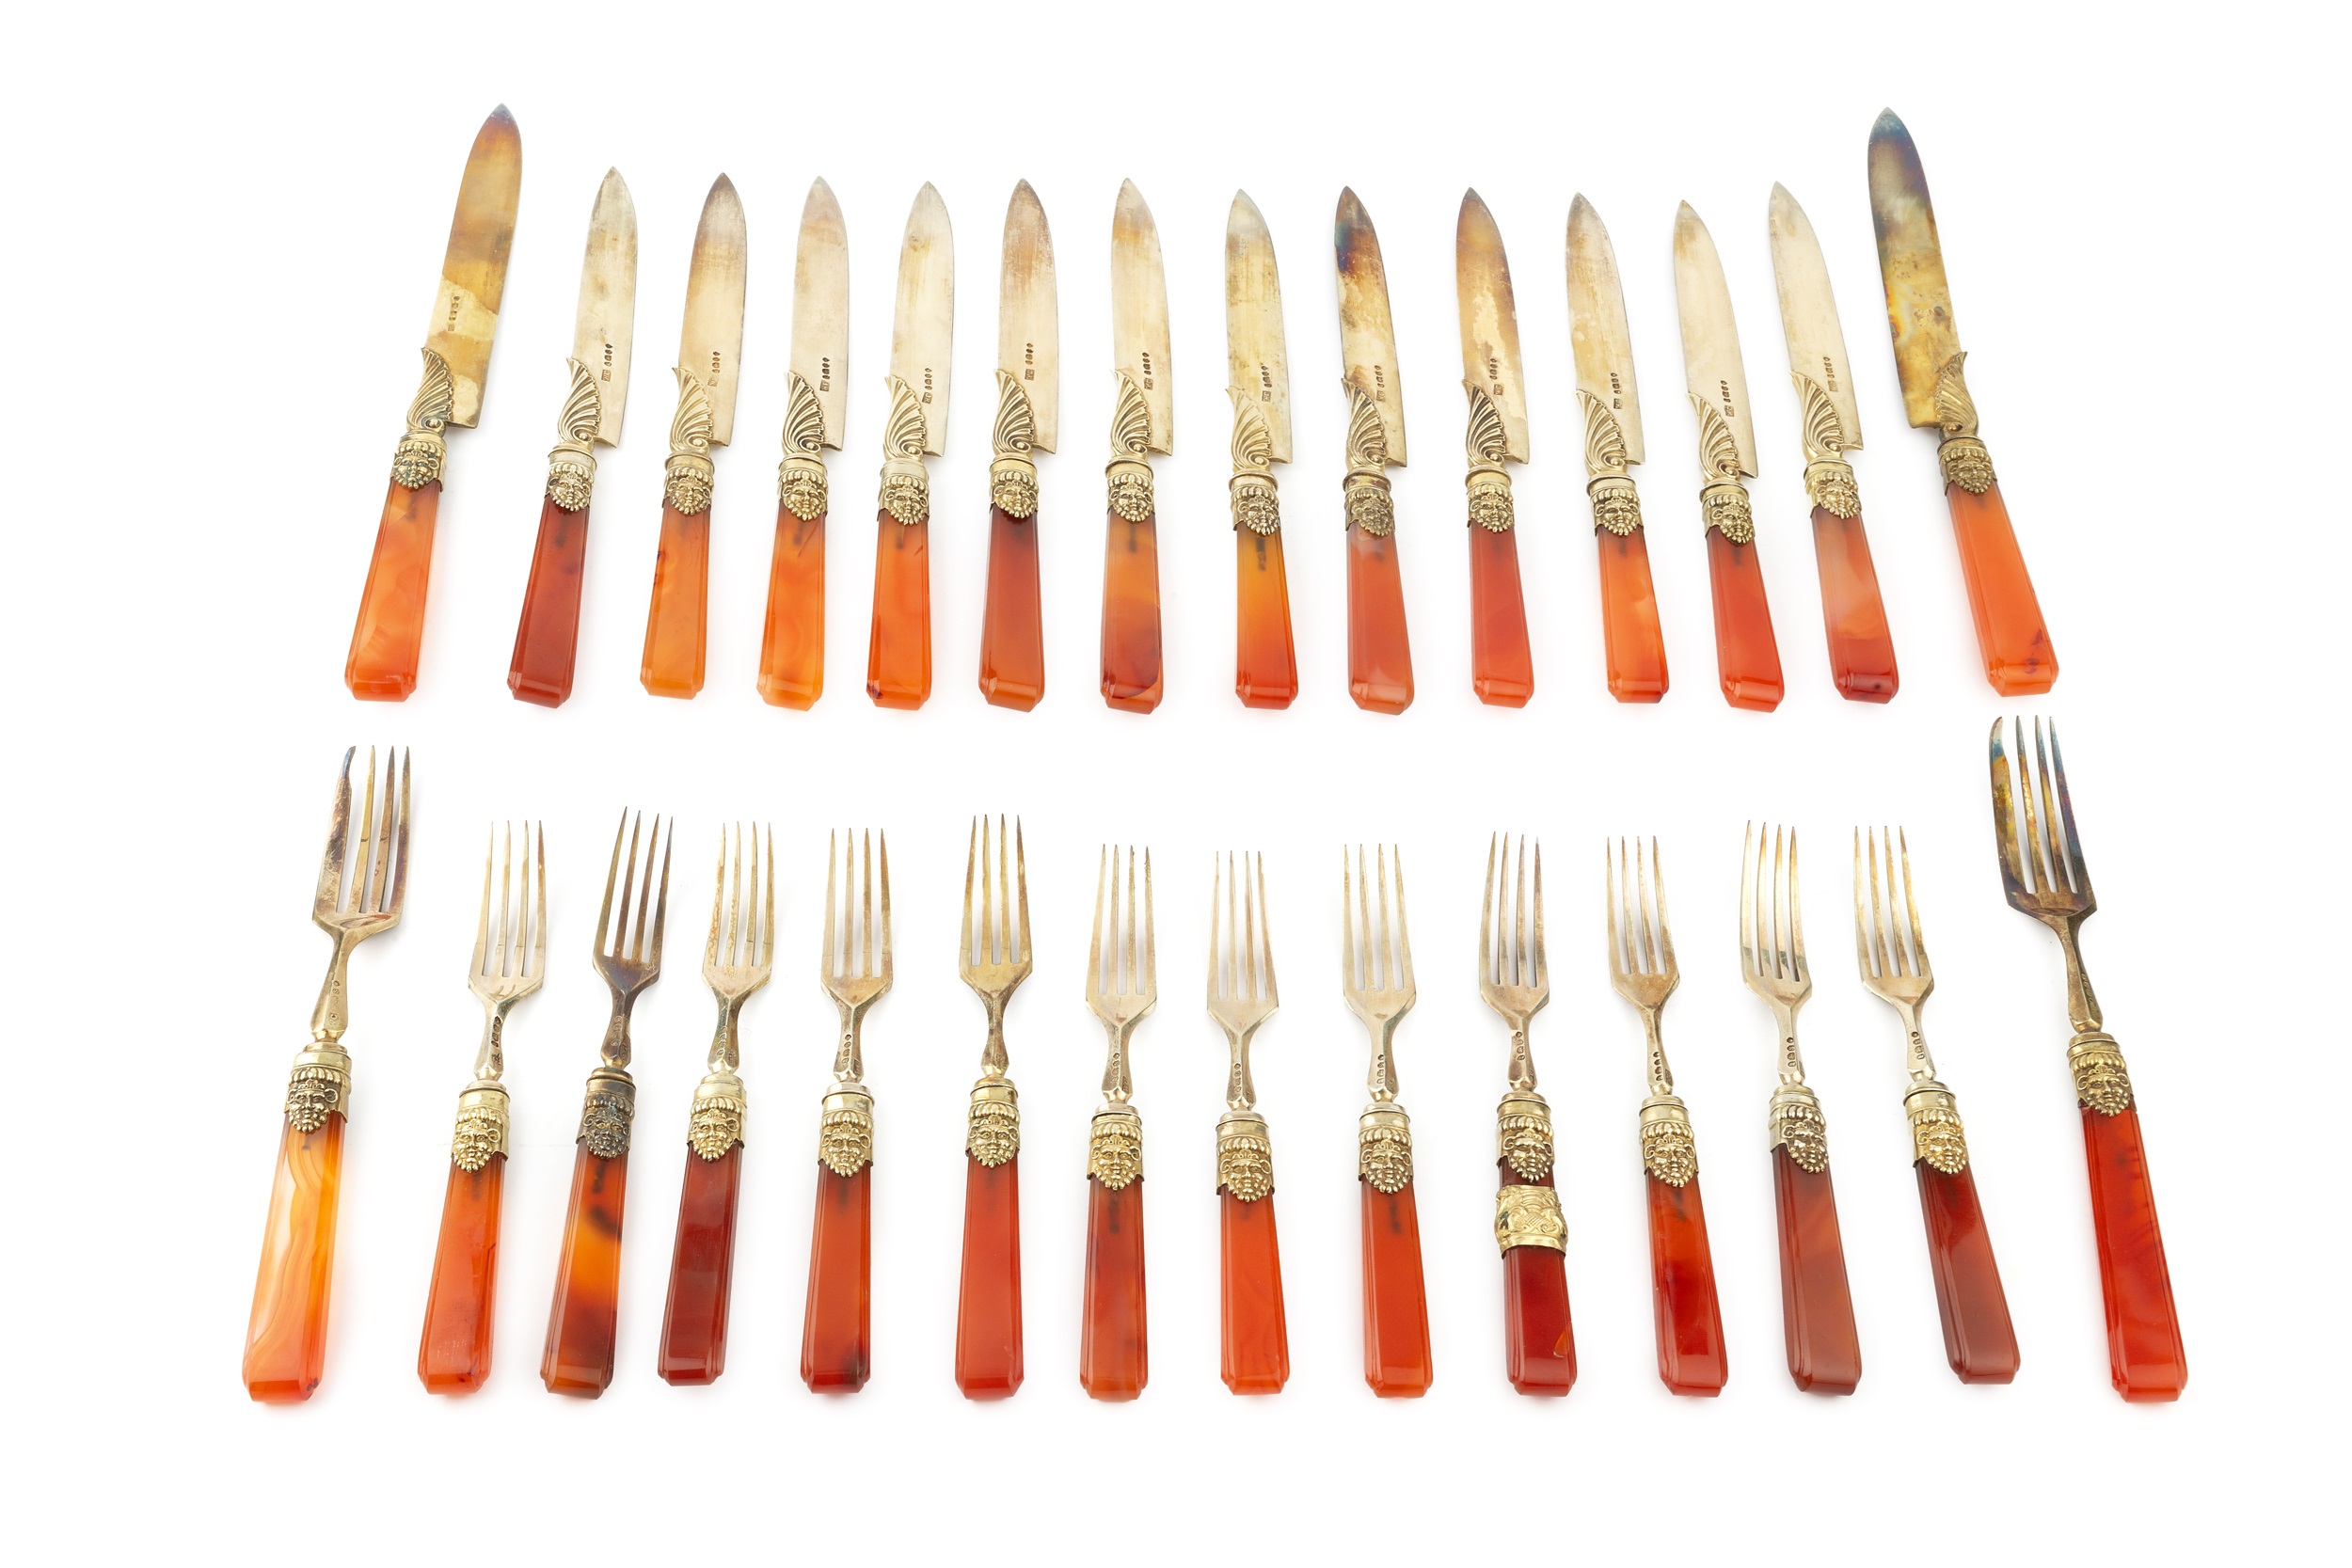 A set of twelve William IV silver-gilt and agate handled dessert knives and forks, with foliate